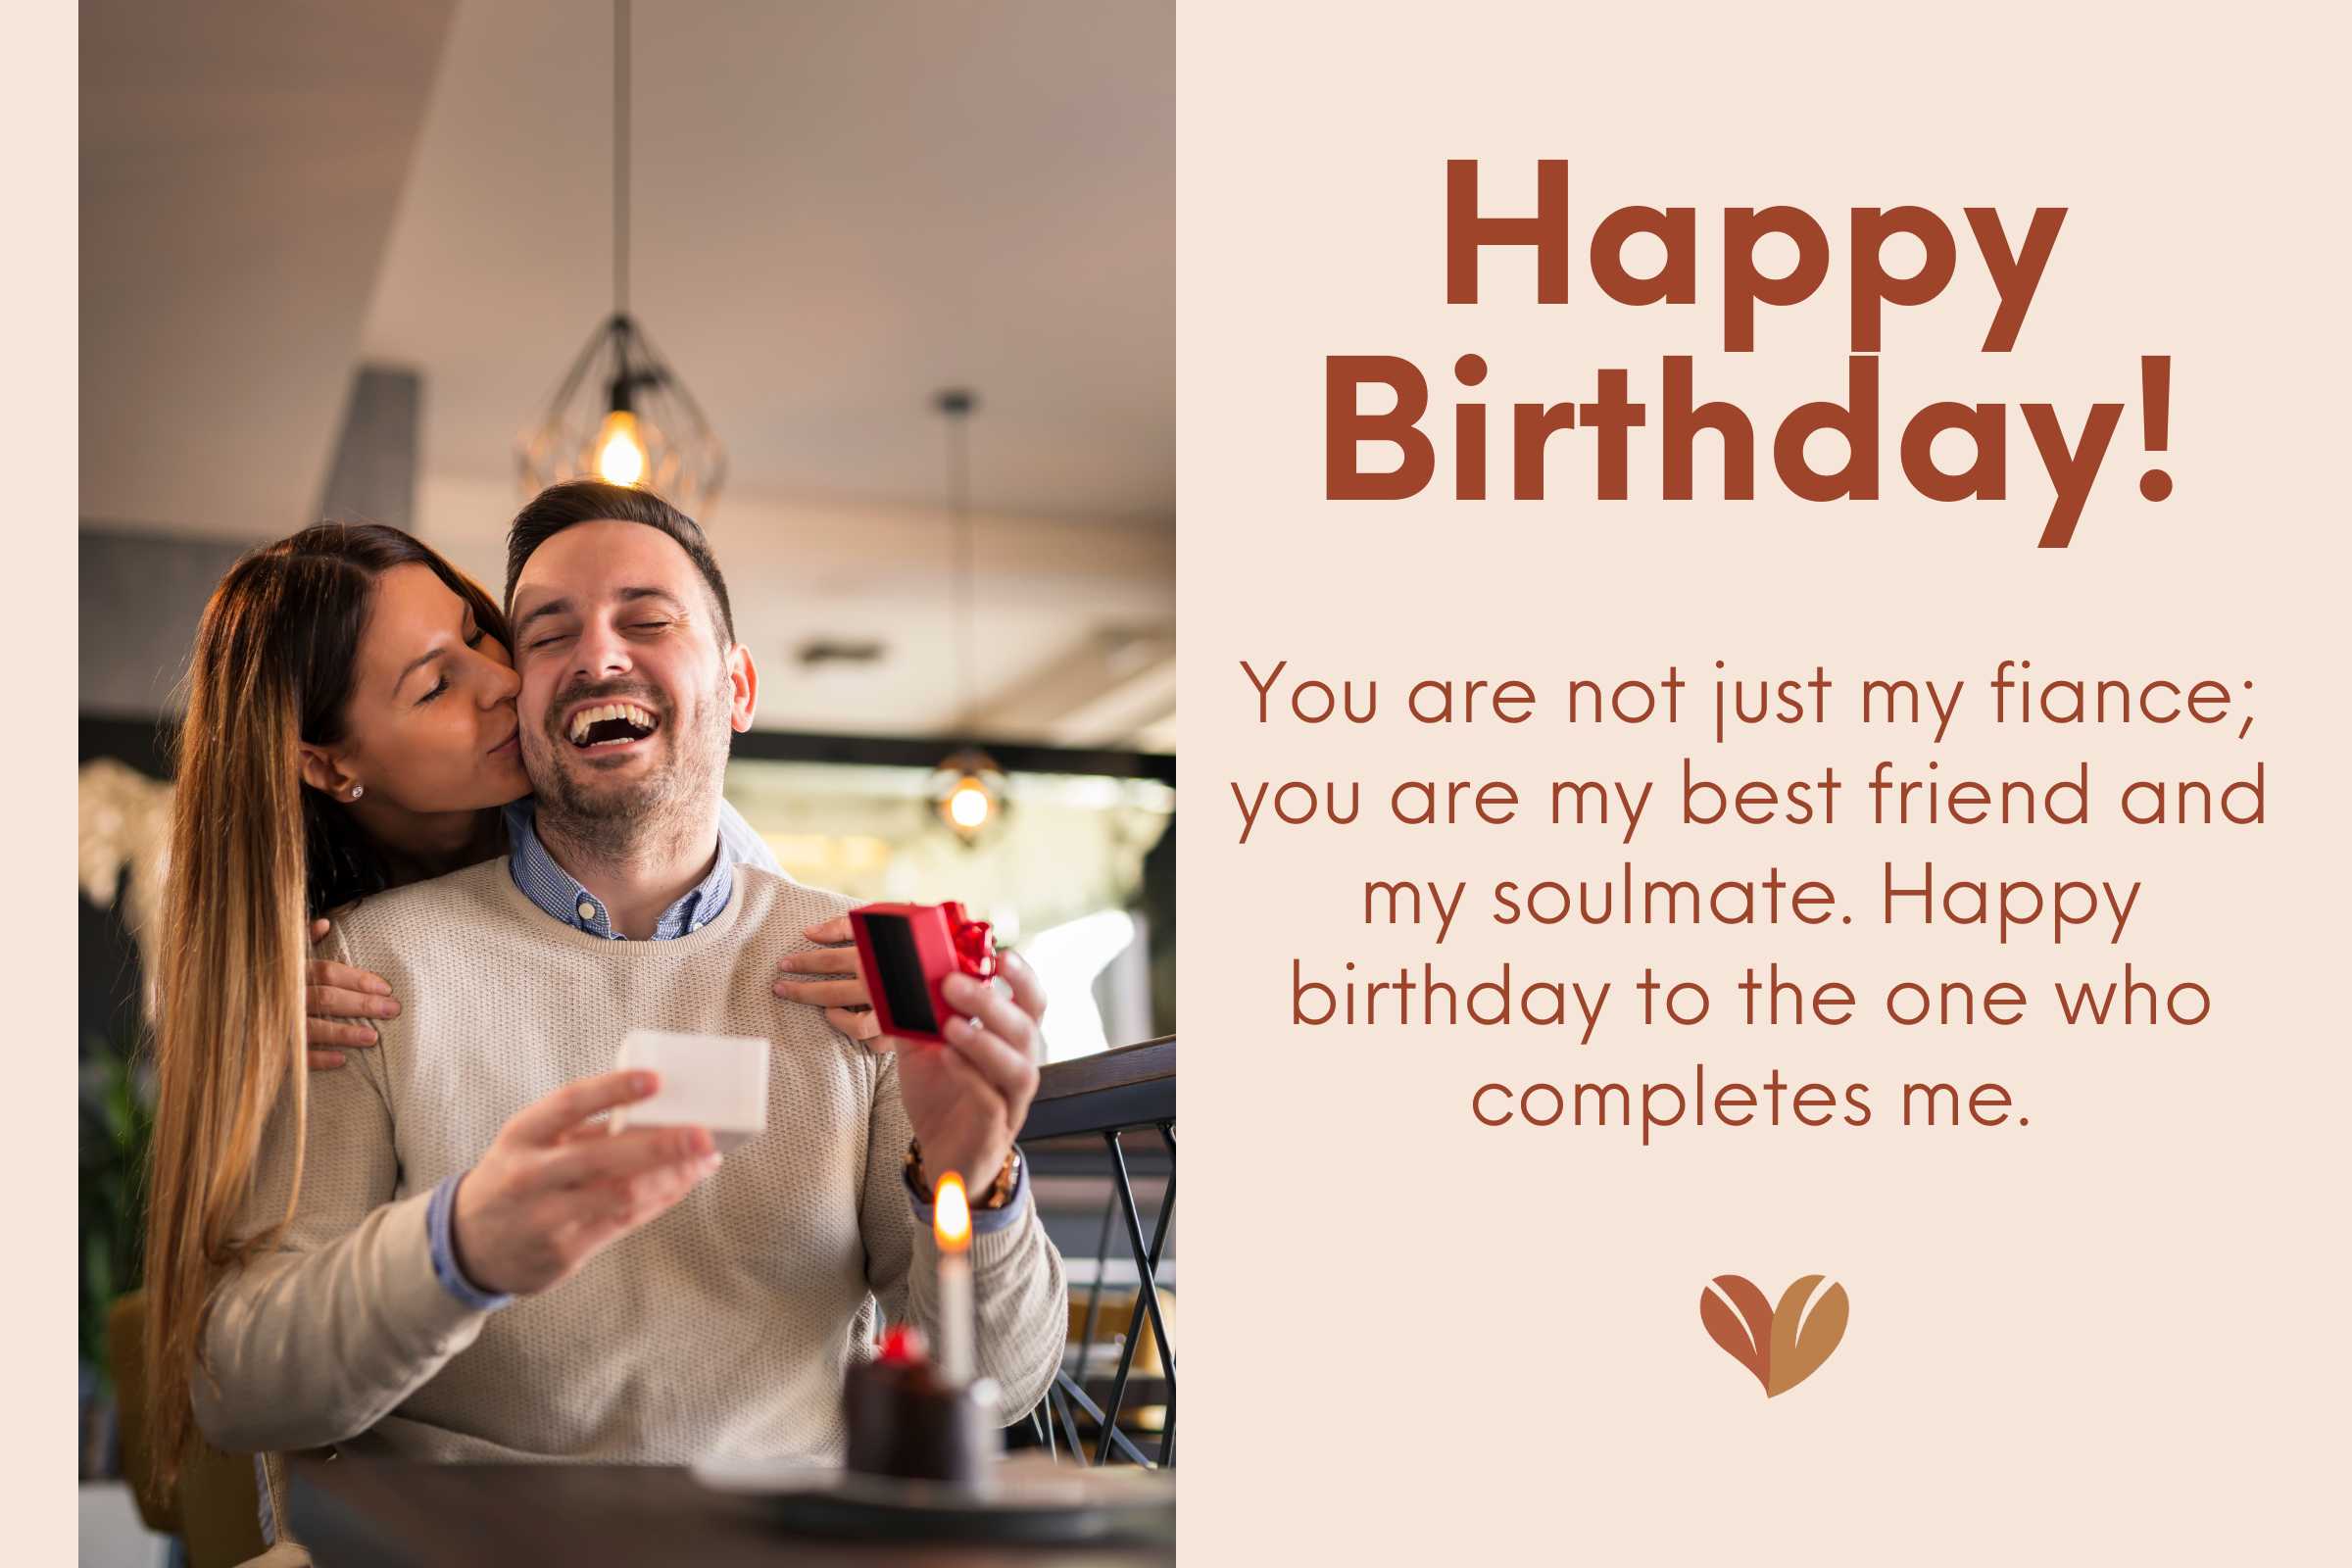 You are my greatest true love - Birthday wishes for male fiancé